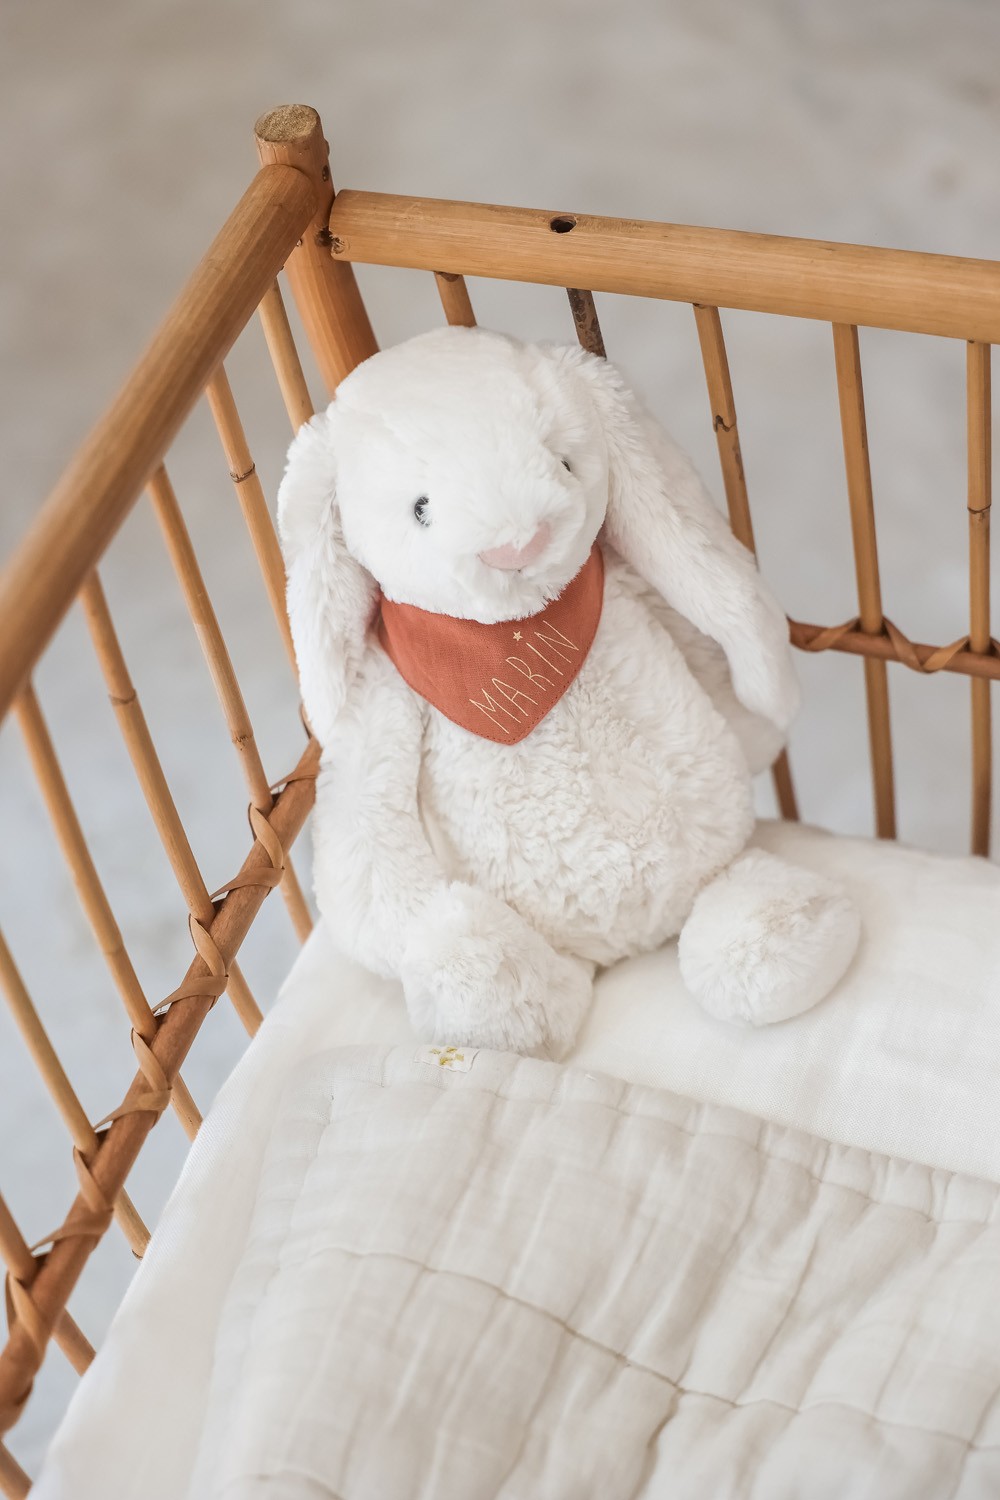  Personalised cuddly toy - Jellycat rabbit